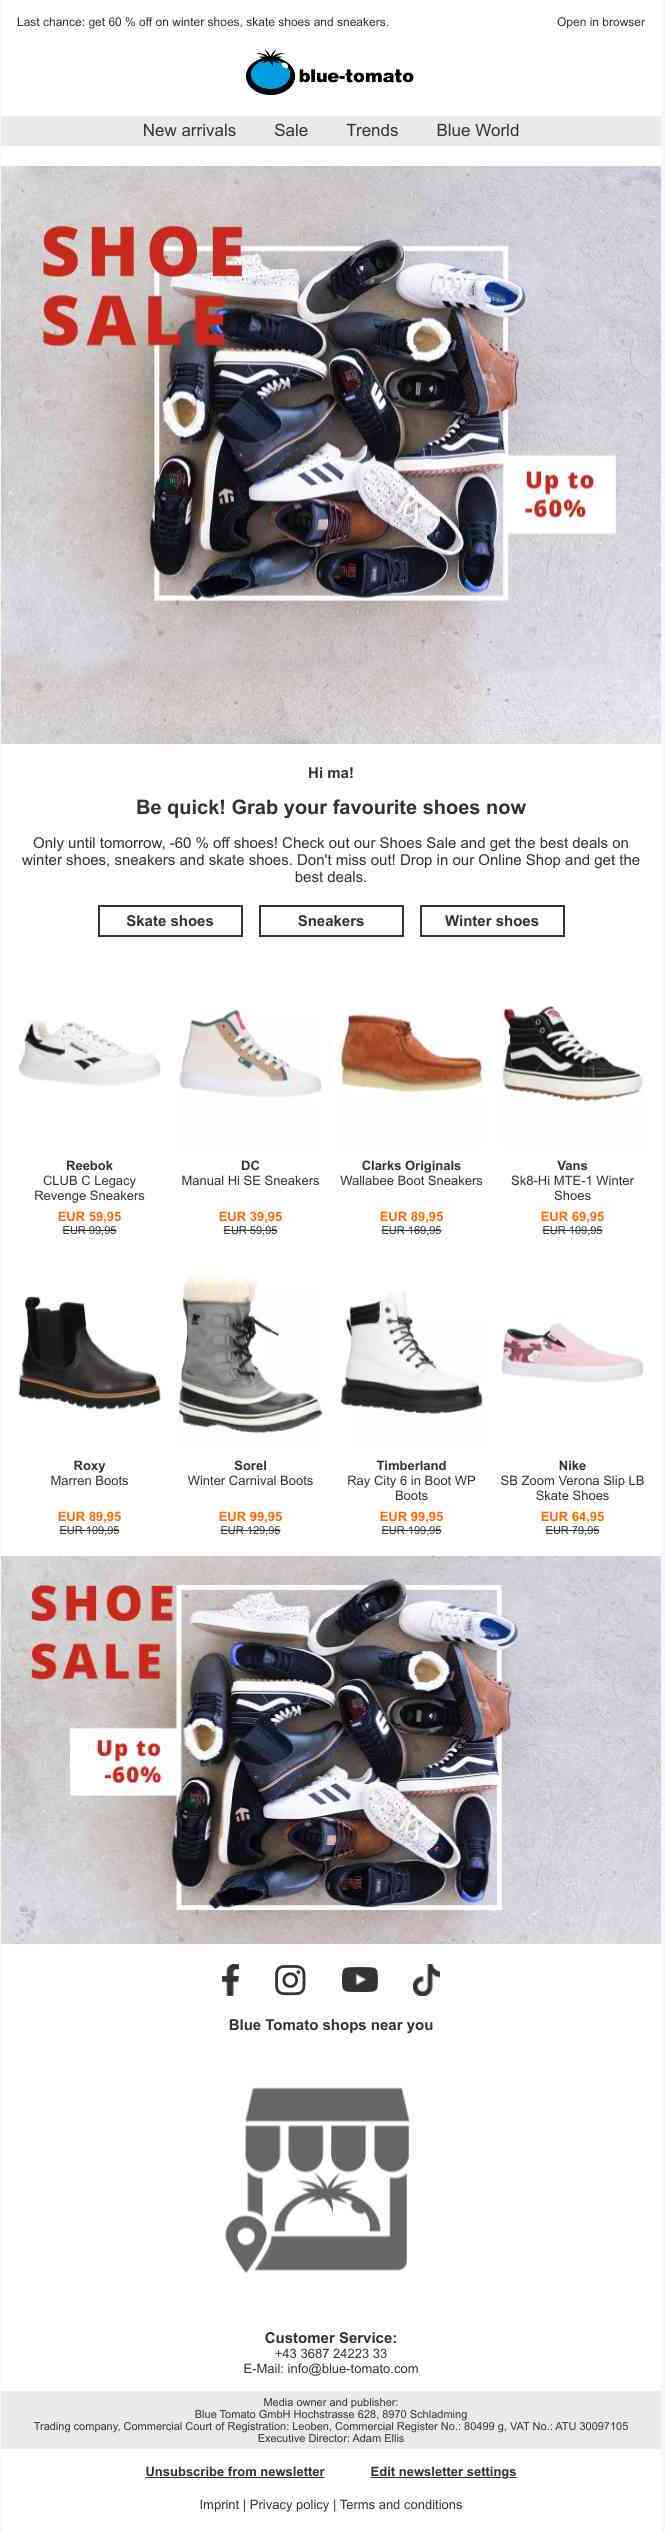 Our Shoes Sale ends tomorrow!